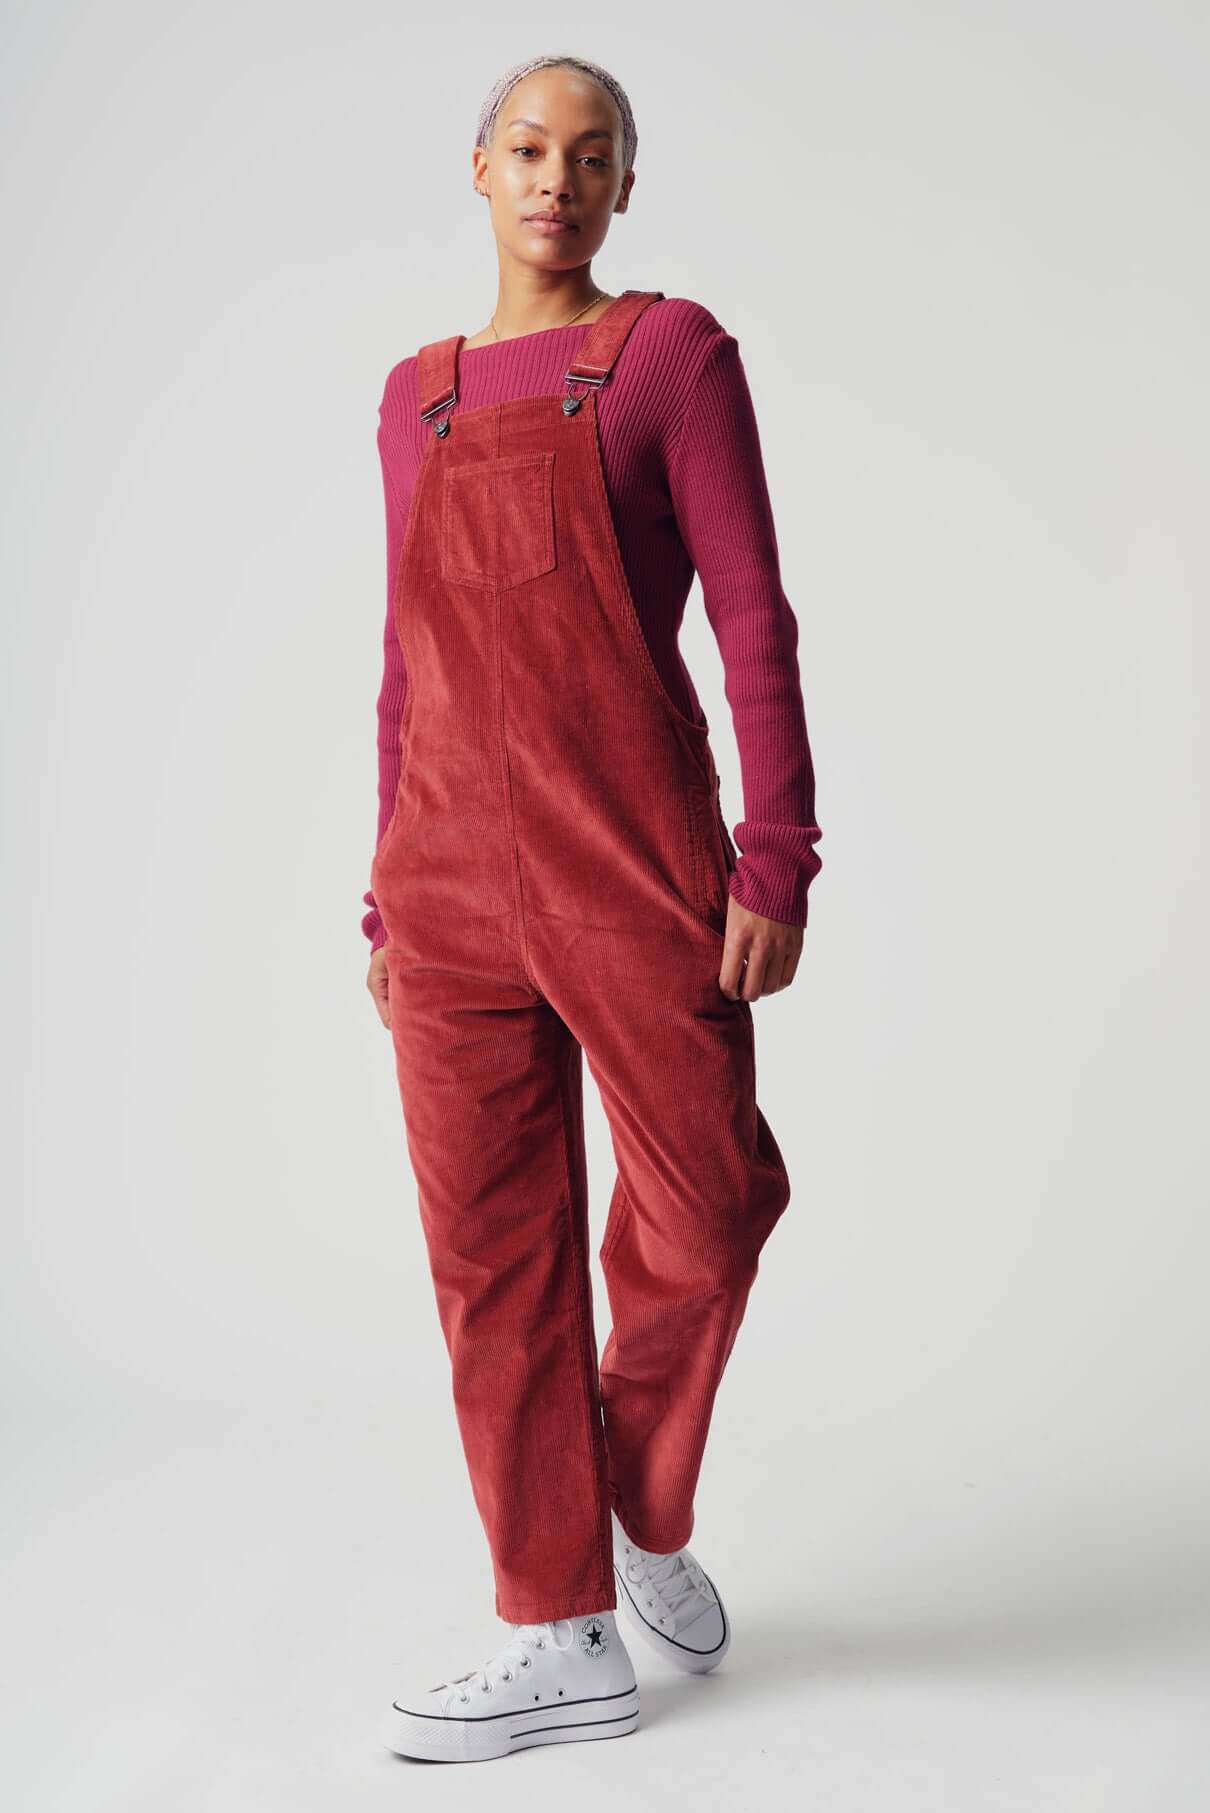 Red JOY dungarees made of organic cotton from Komodo